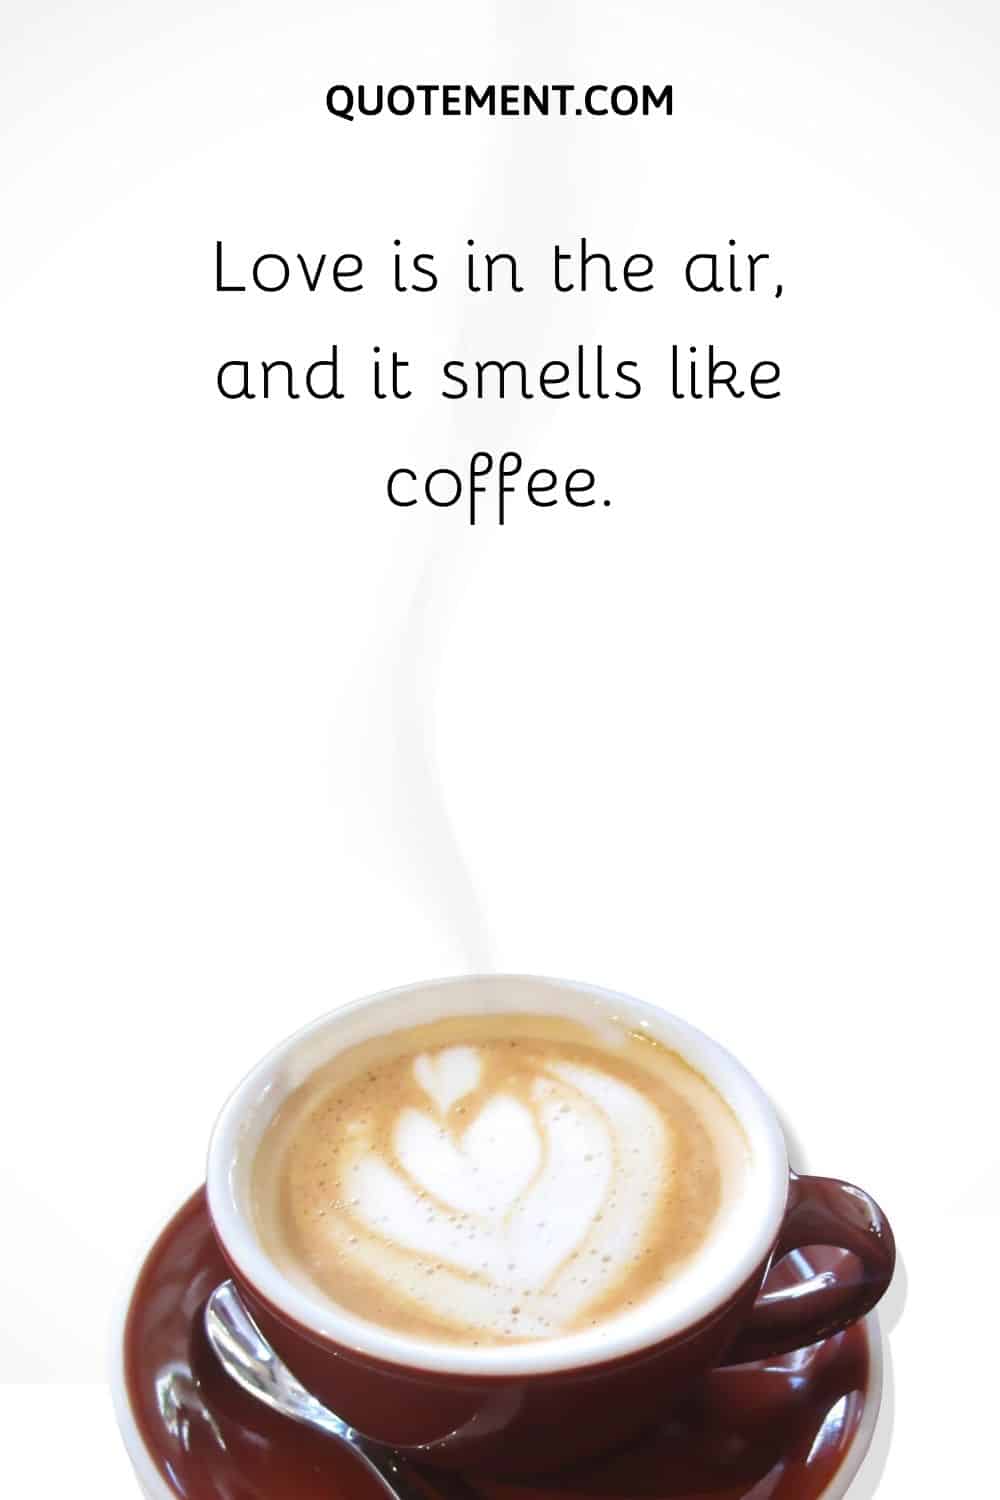 Love is in the air, and it smells like coffee